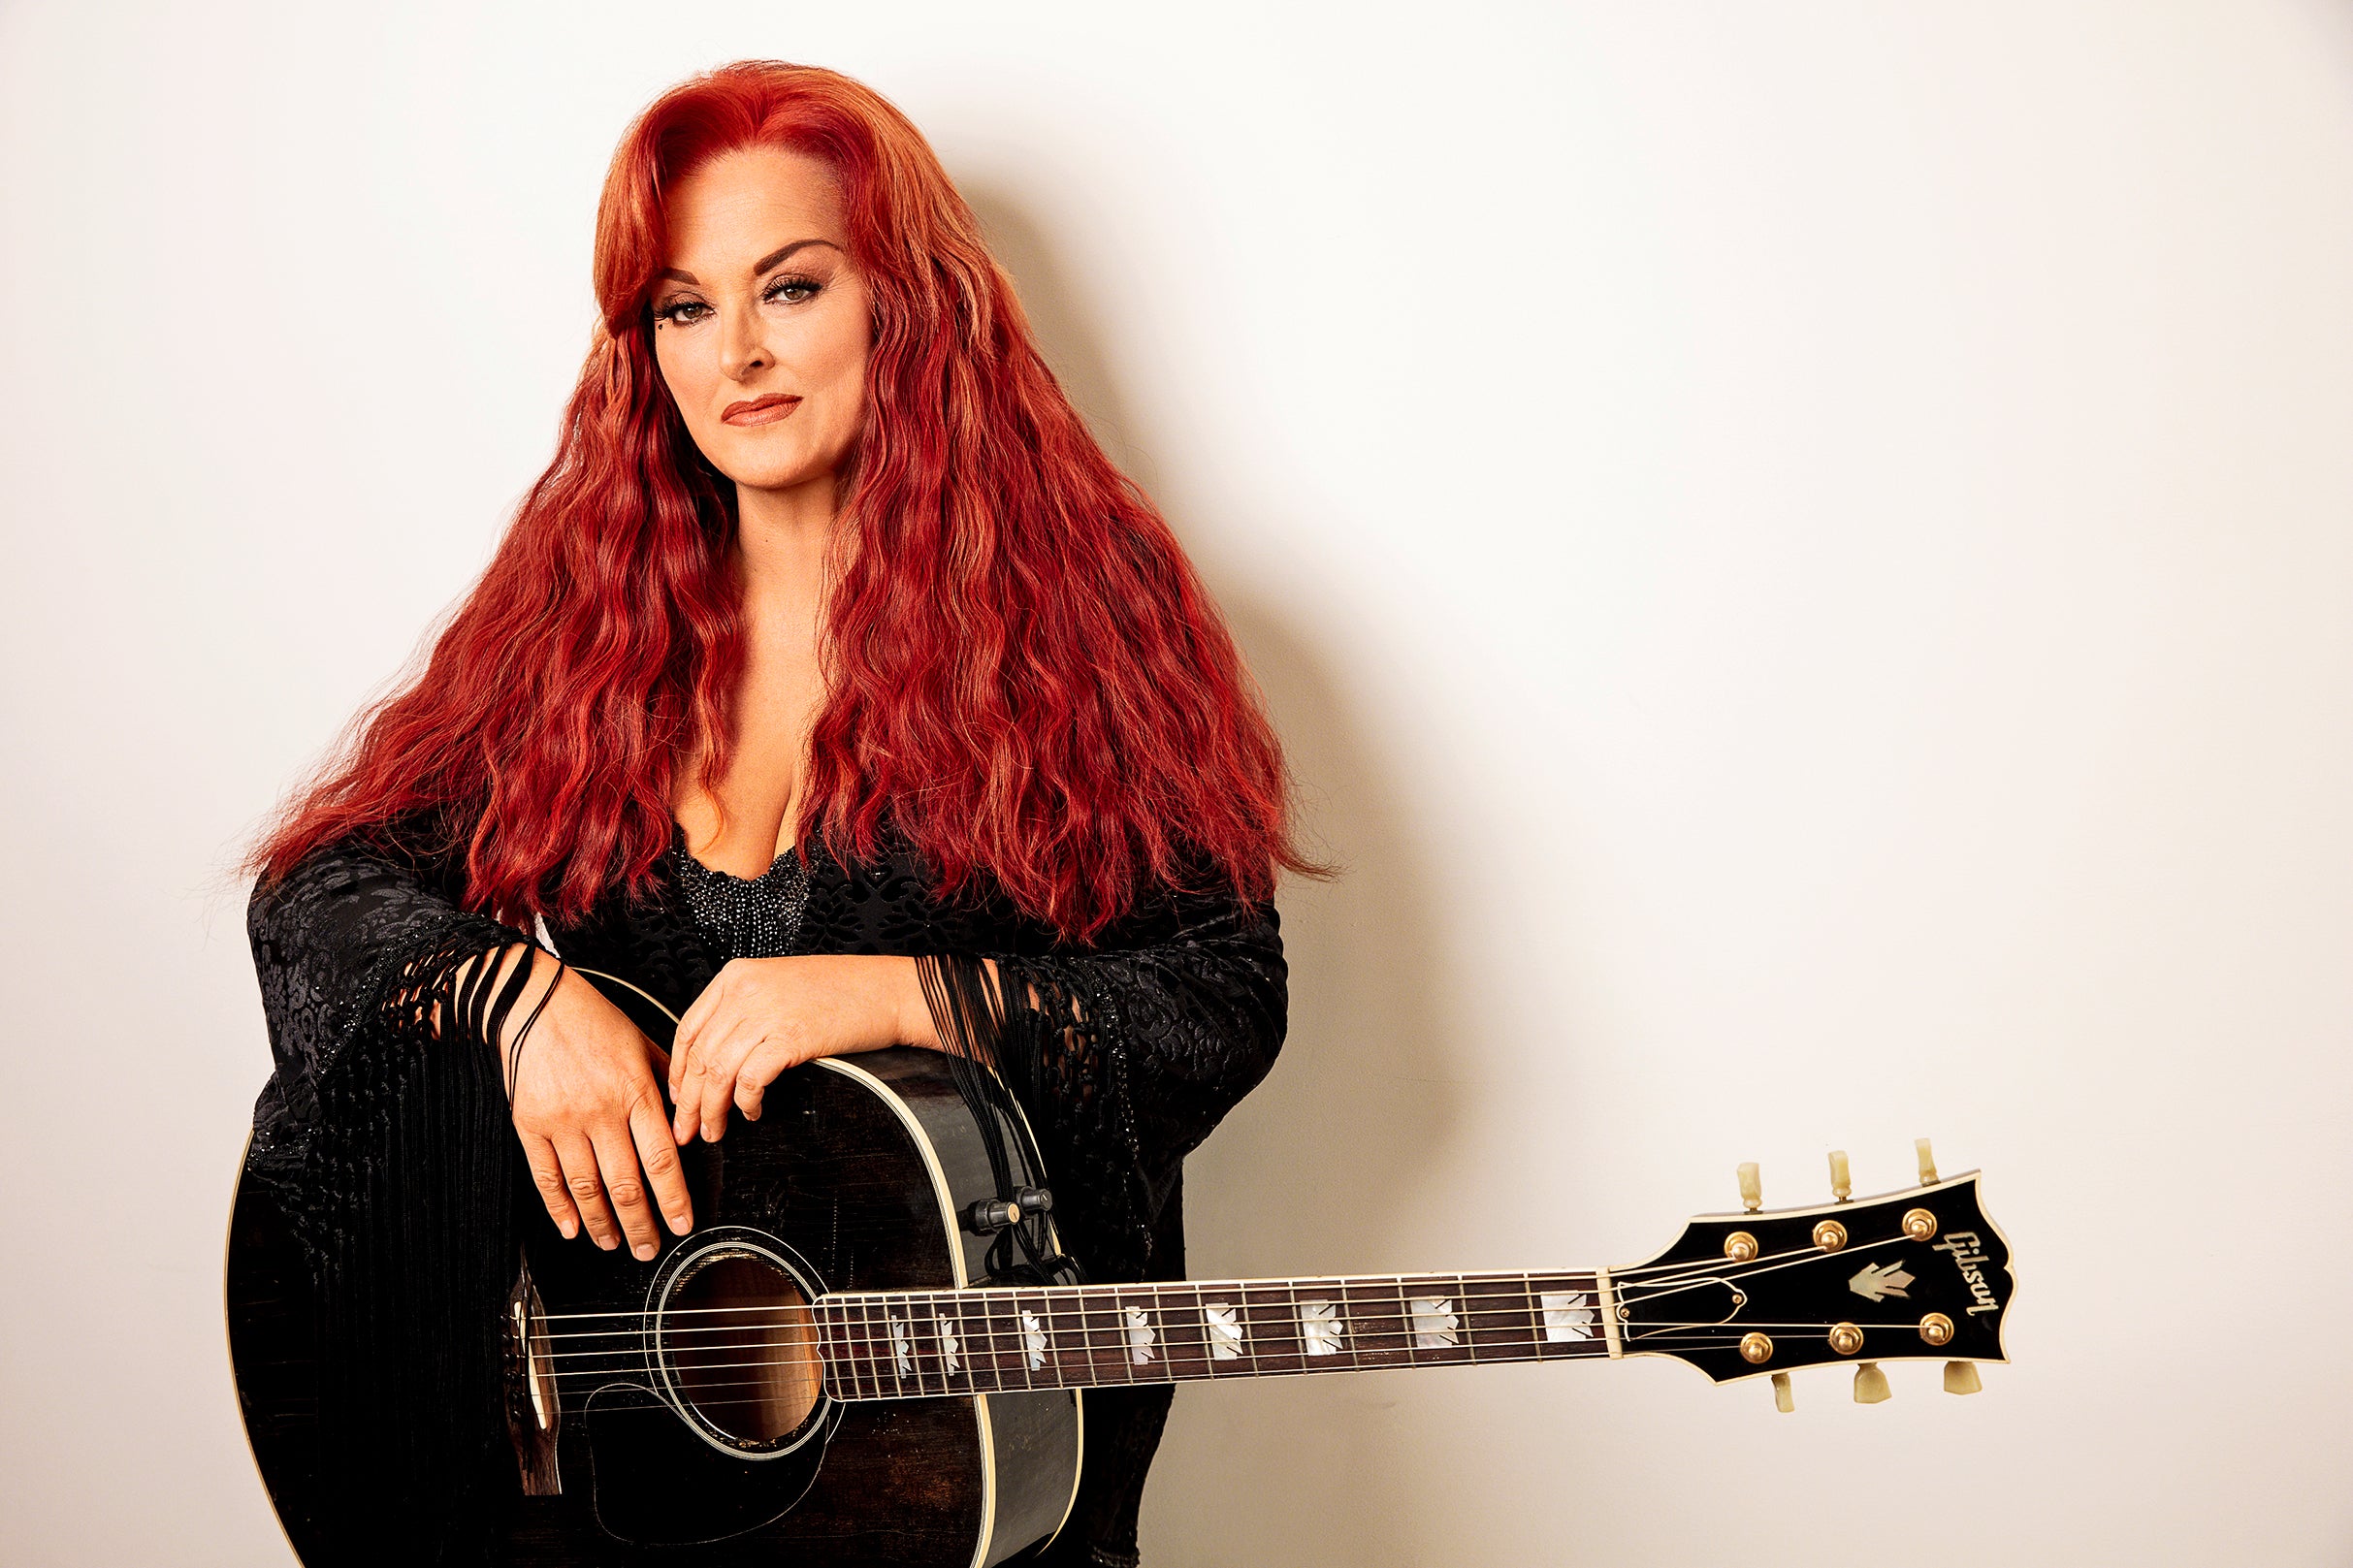 Wynonna Judd: Back to Wy Tour free presale c0de for early tickets in Prior Lake